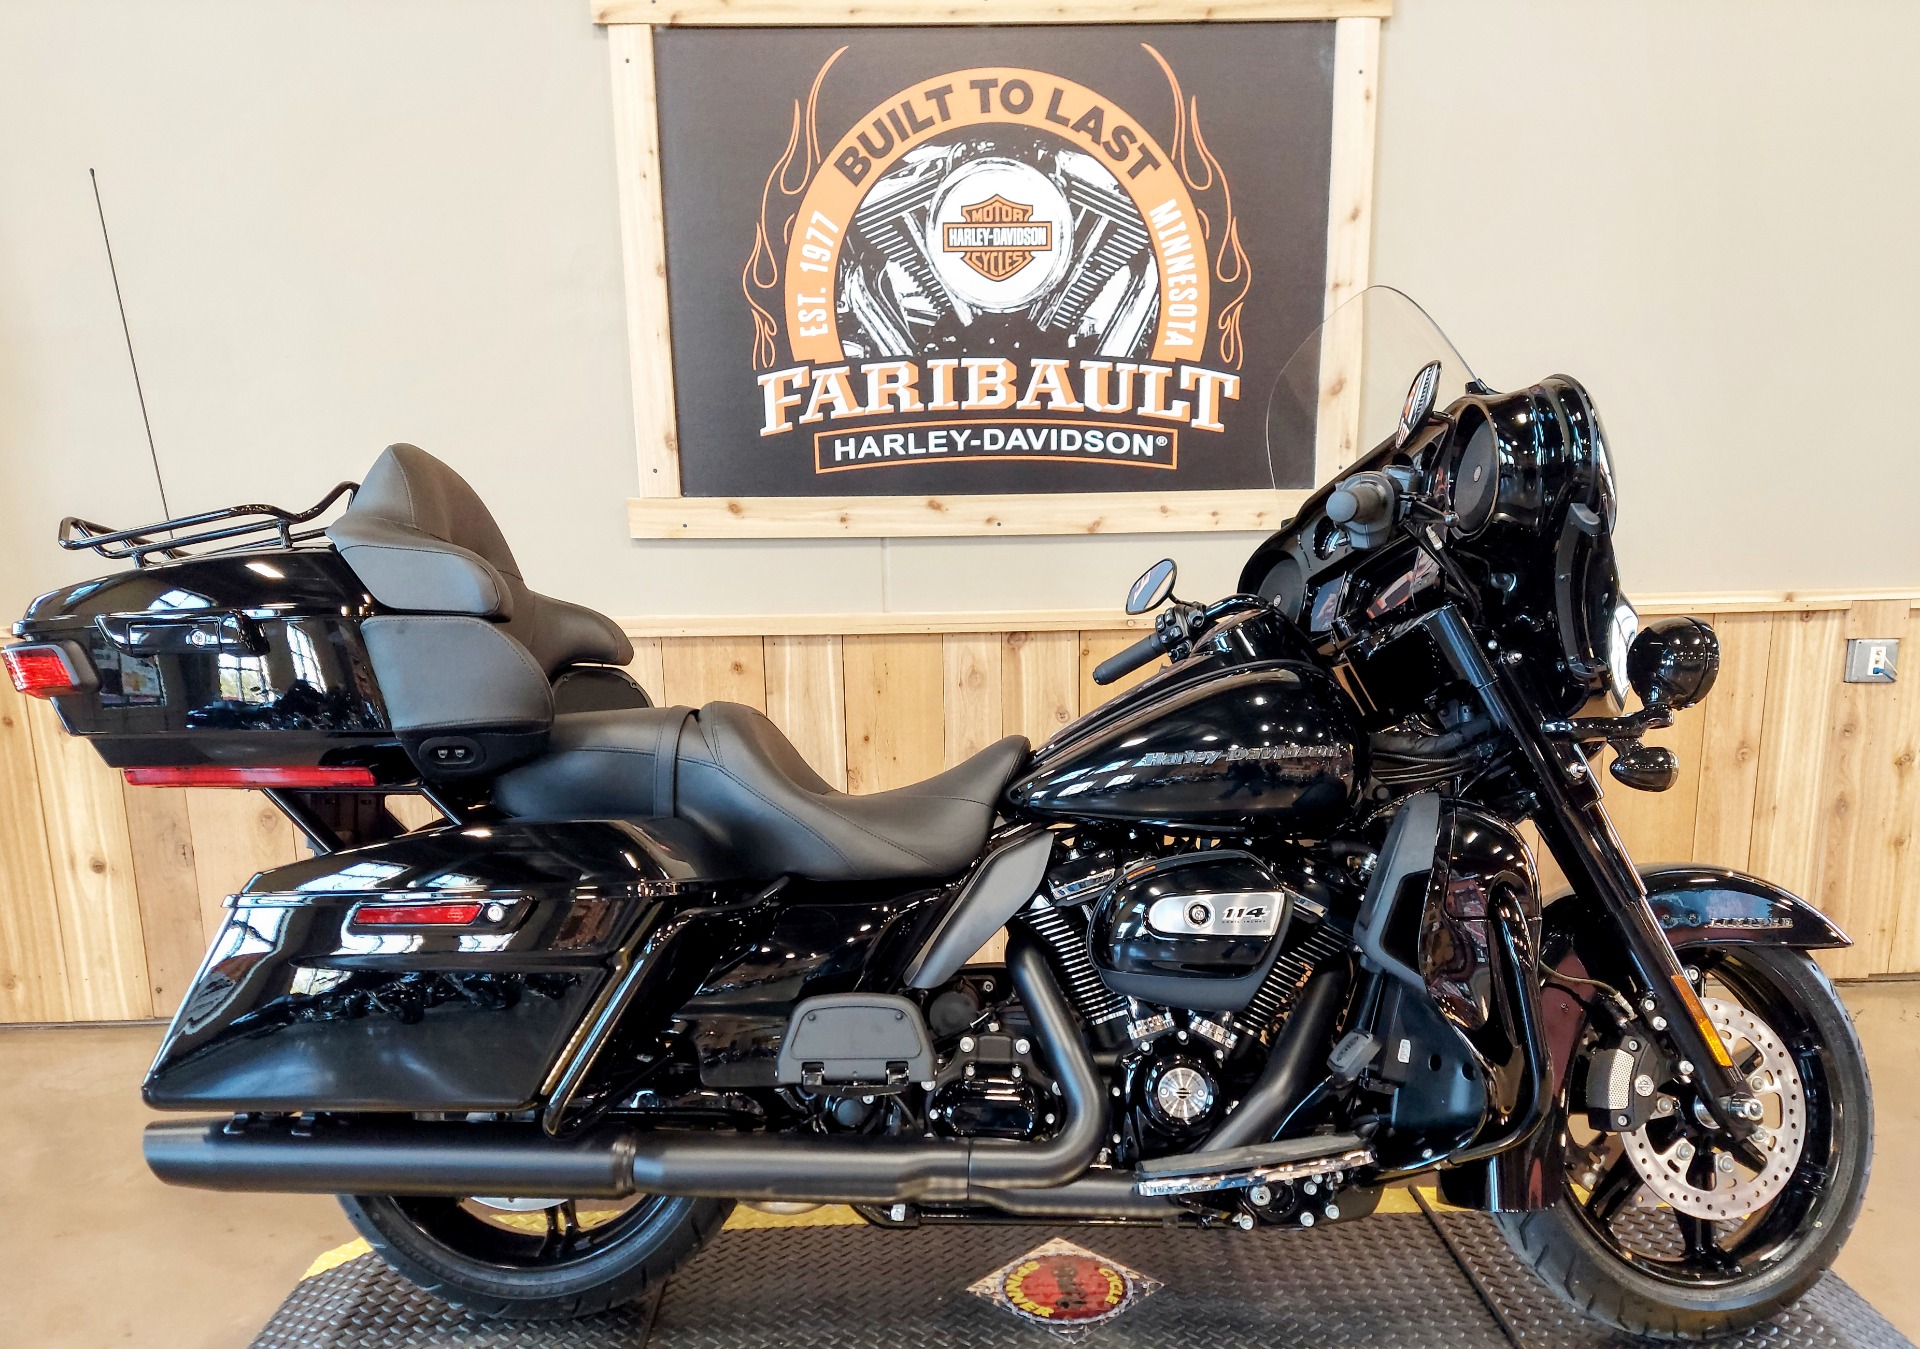 New 2021 Harley Davidson Ultra Limited Motorcycles In Faribault Mn To633263 Vivid Black Black Pearl Option